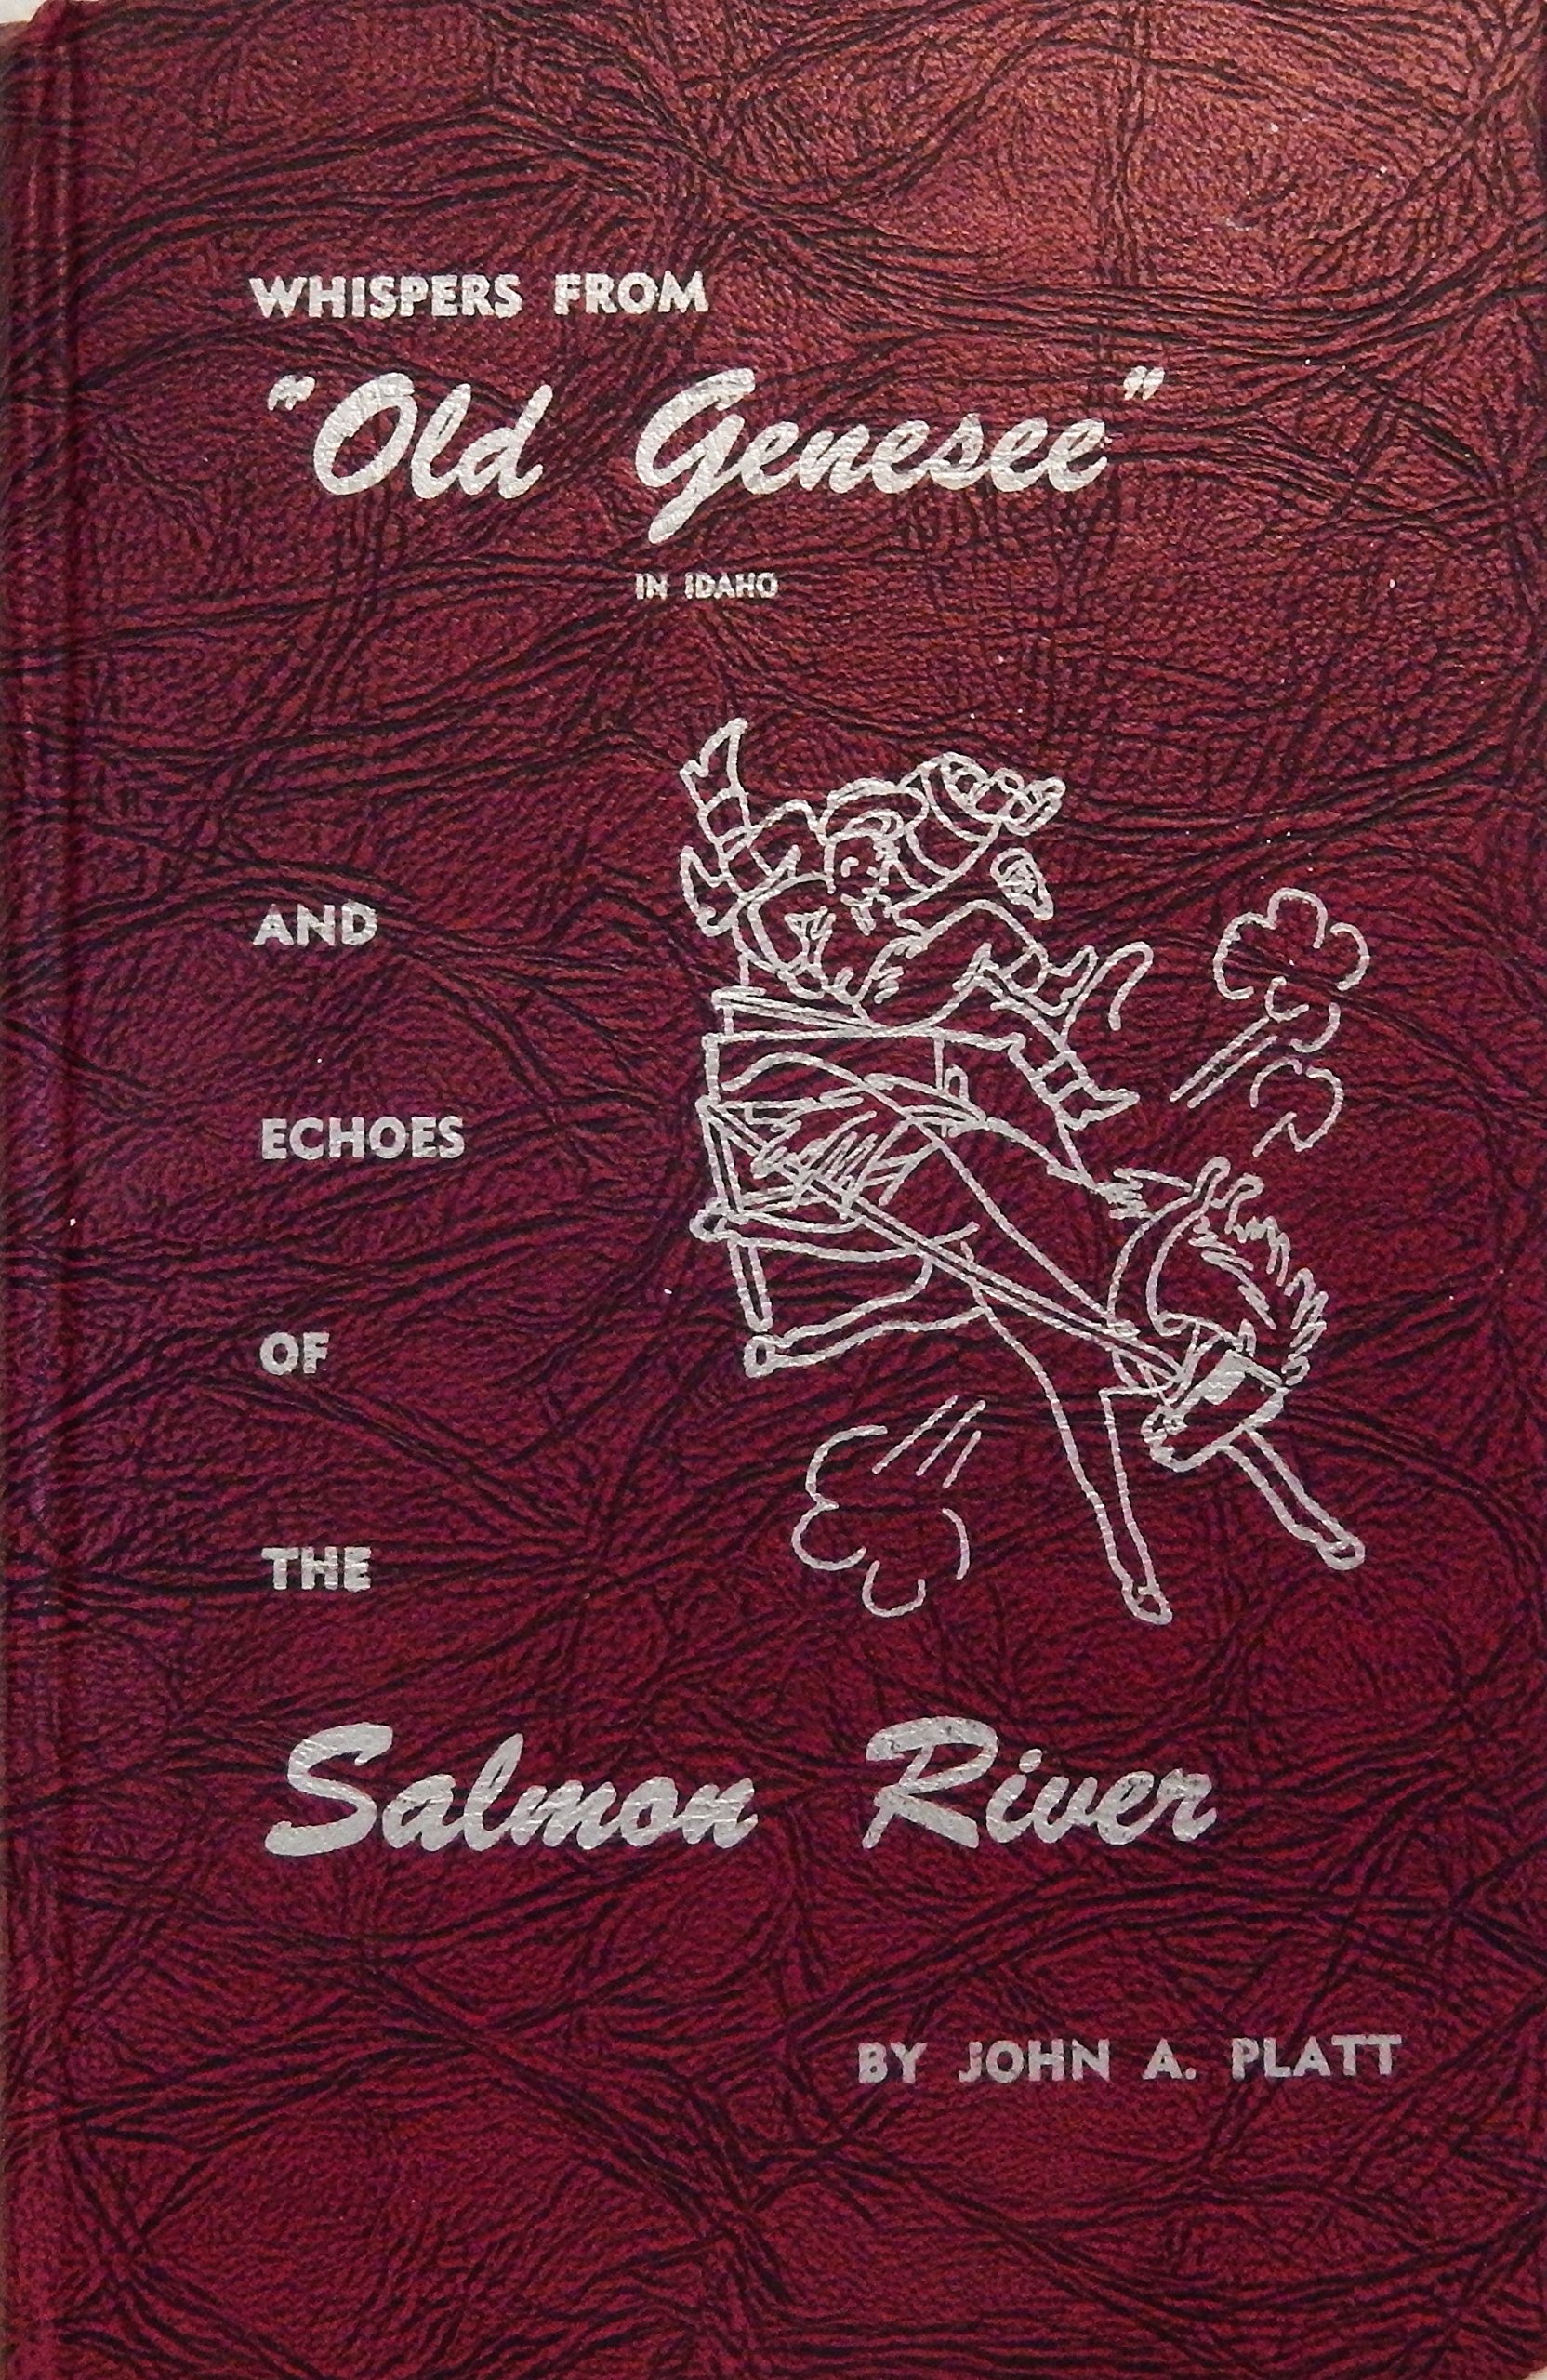 Whispers from old Genesee and echoes of the Salmon River (book cover)